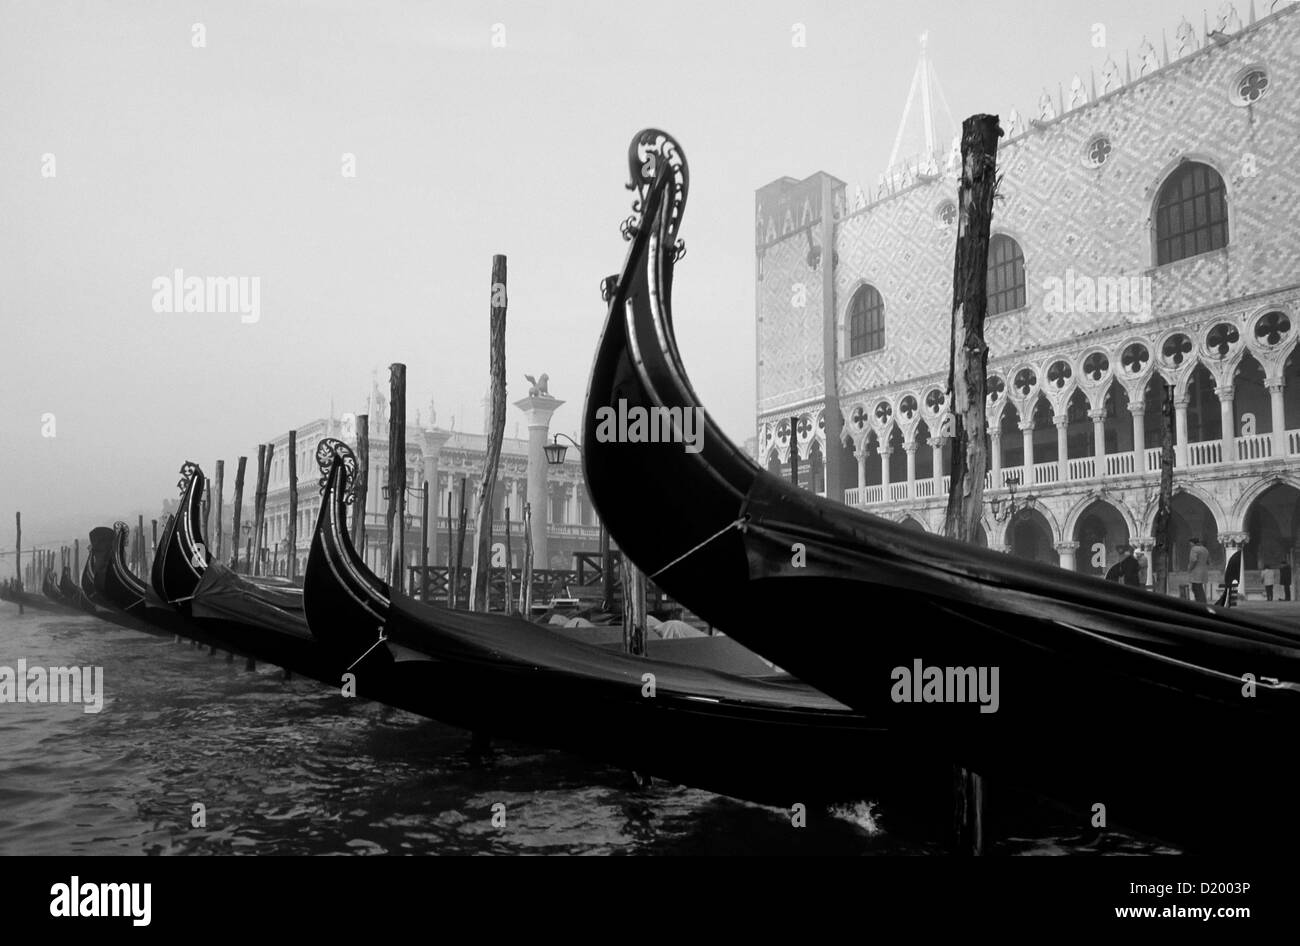 Gondolas in front of the Doges Palace, Venice, Italy Stock Photo